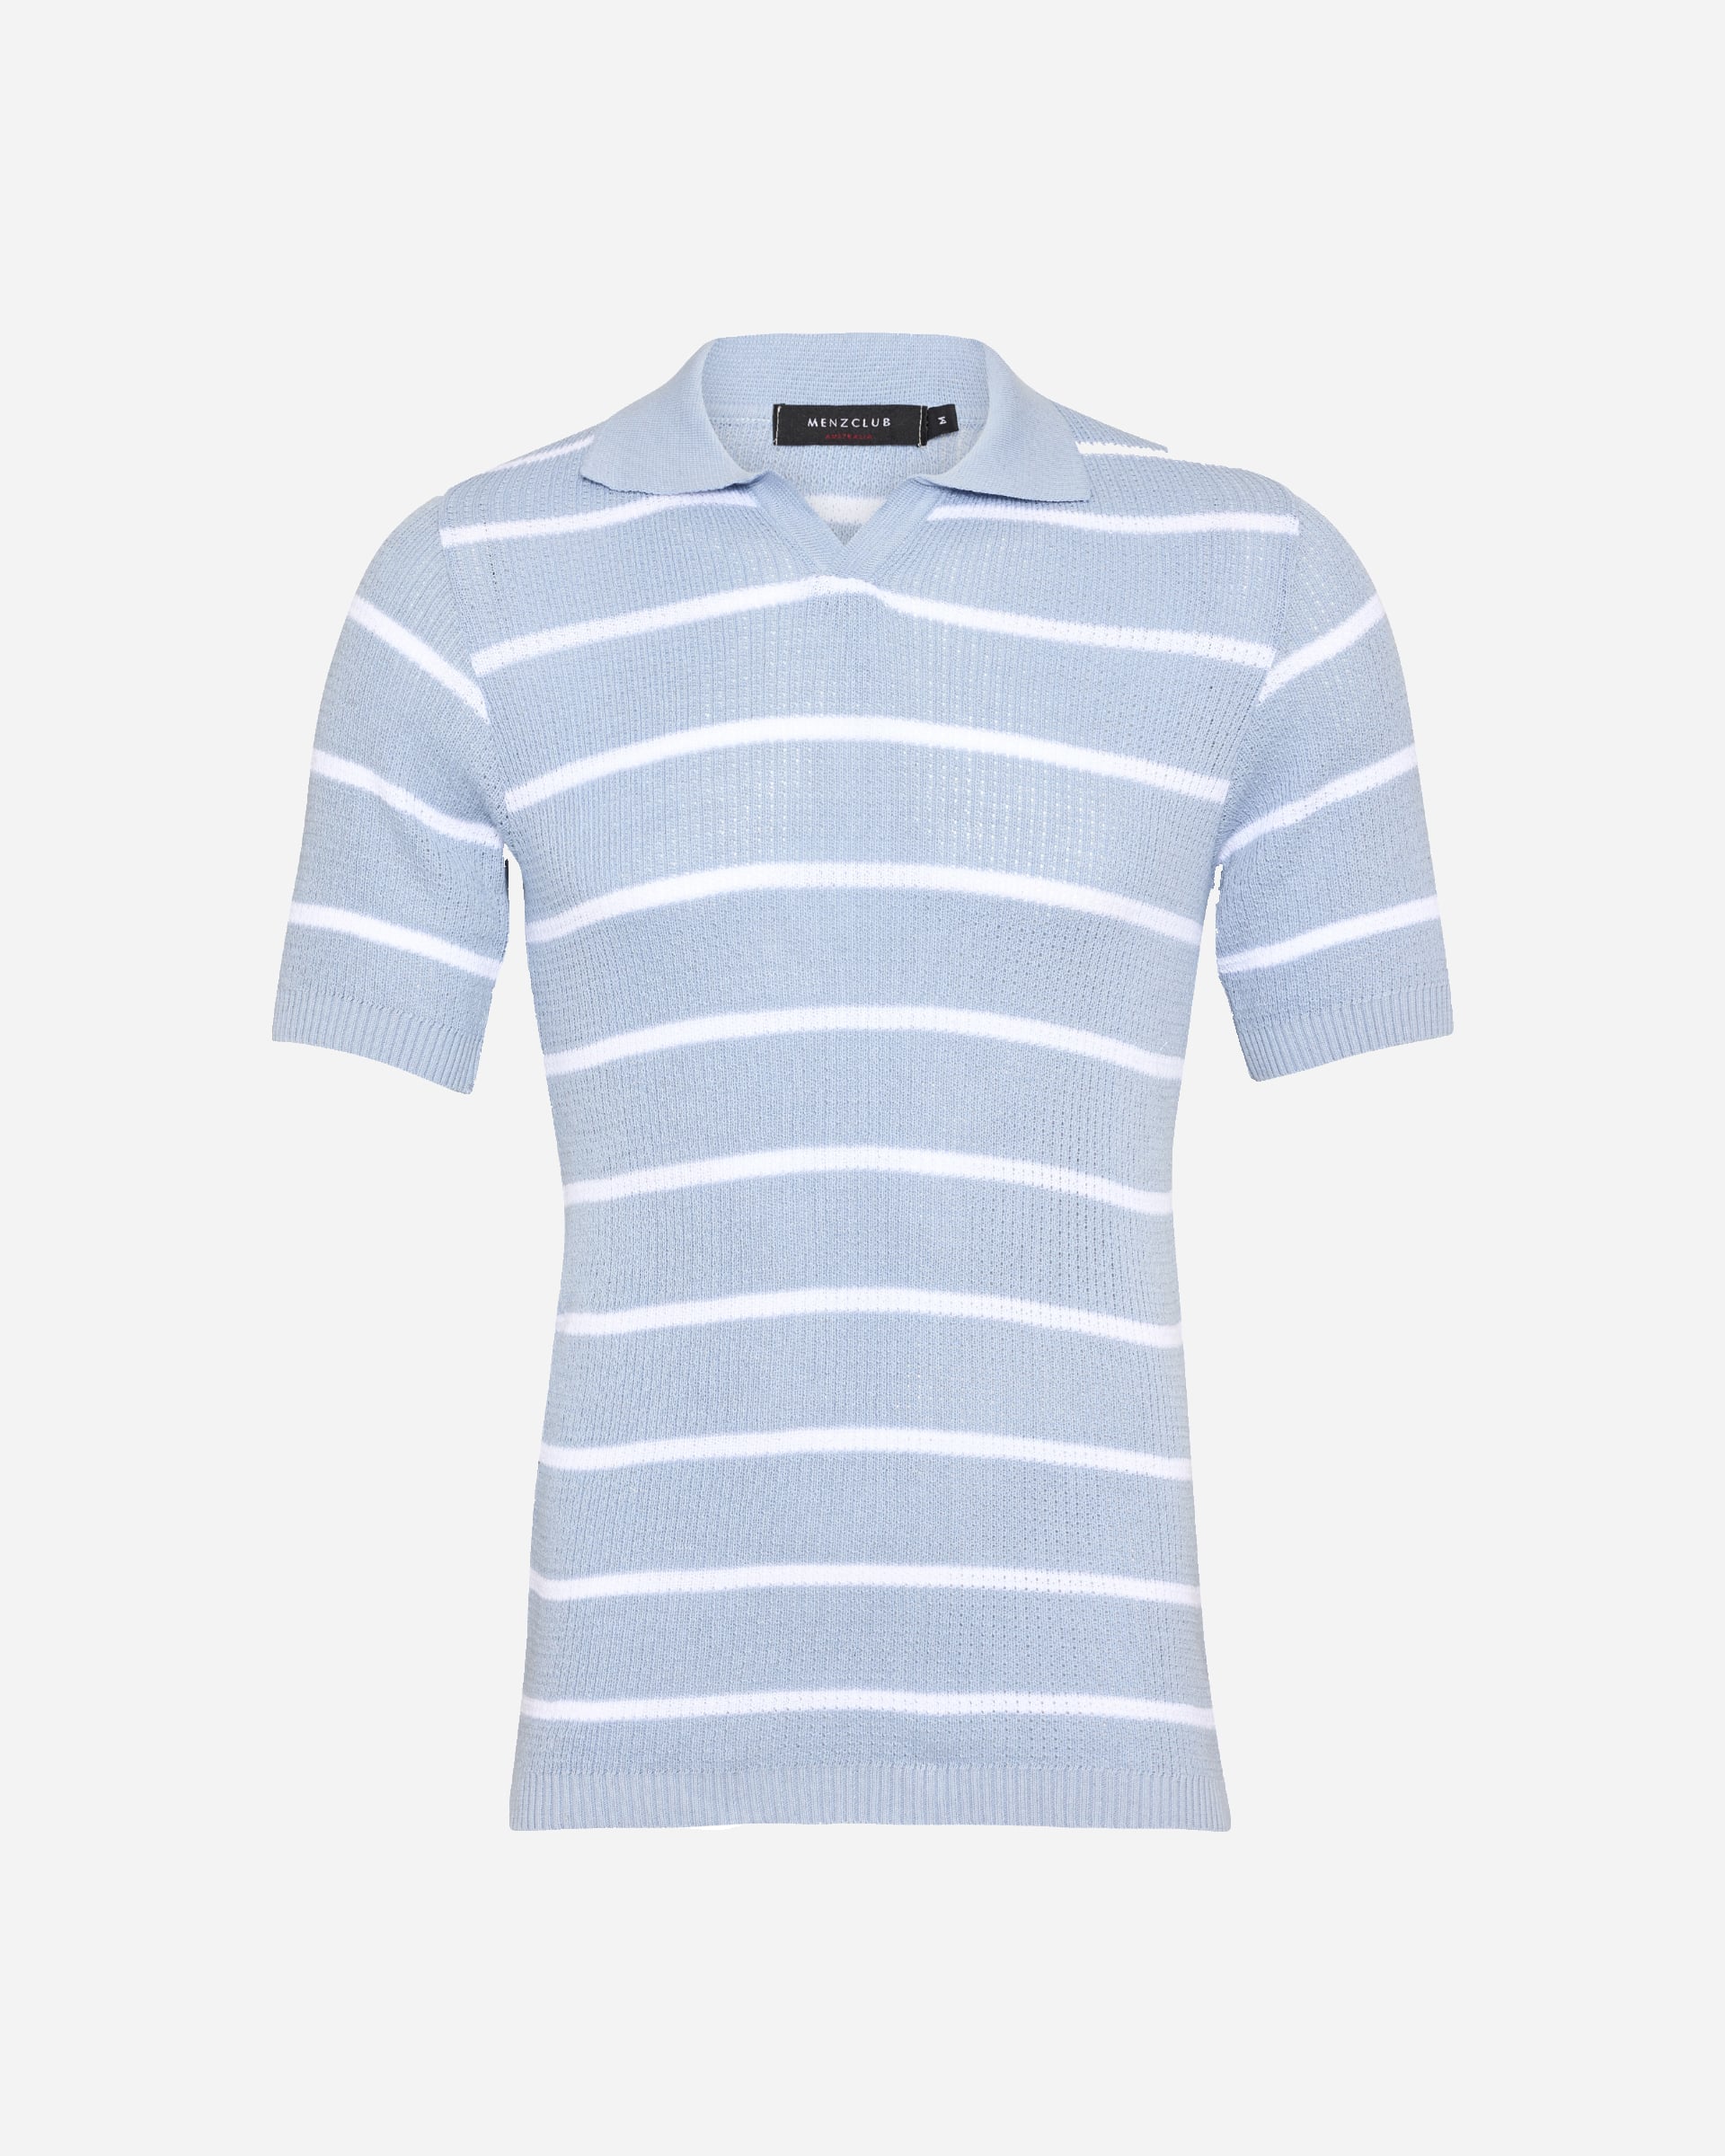 Stripe Knitted Polo - Men's Polo Shirts at Menzclub